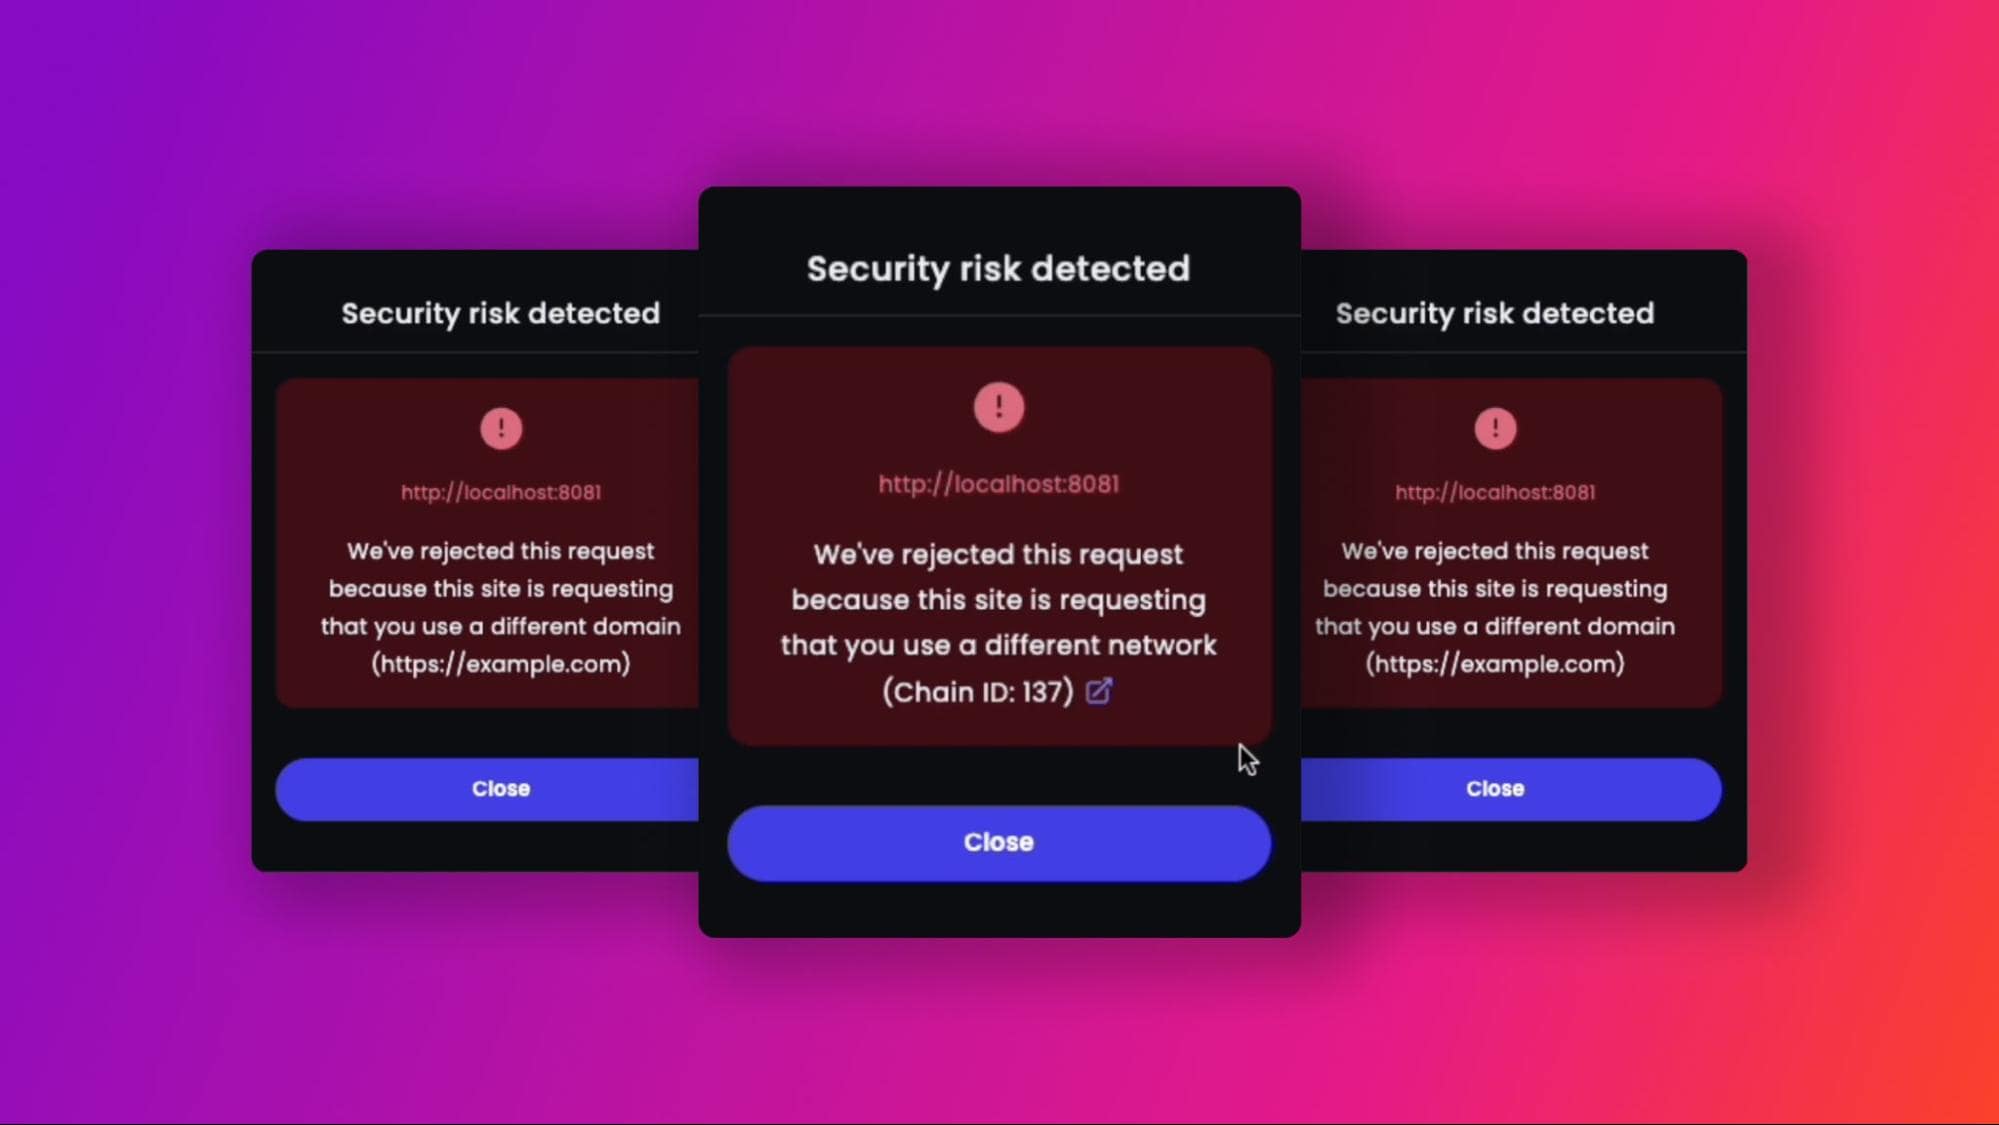 A 'Security risk detected' prompt is displayed